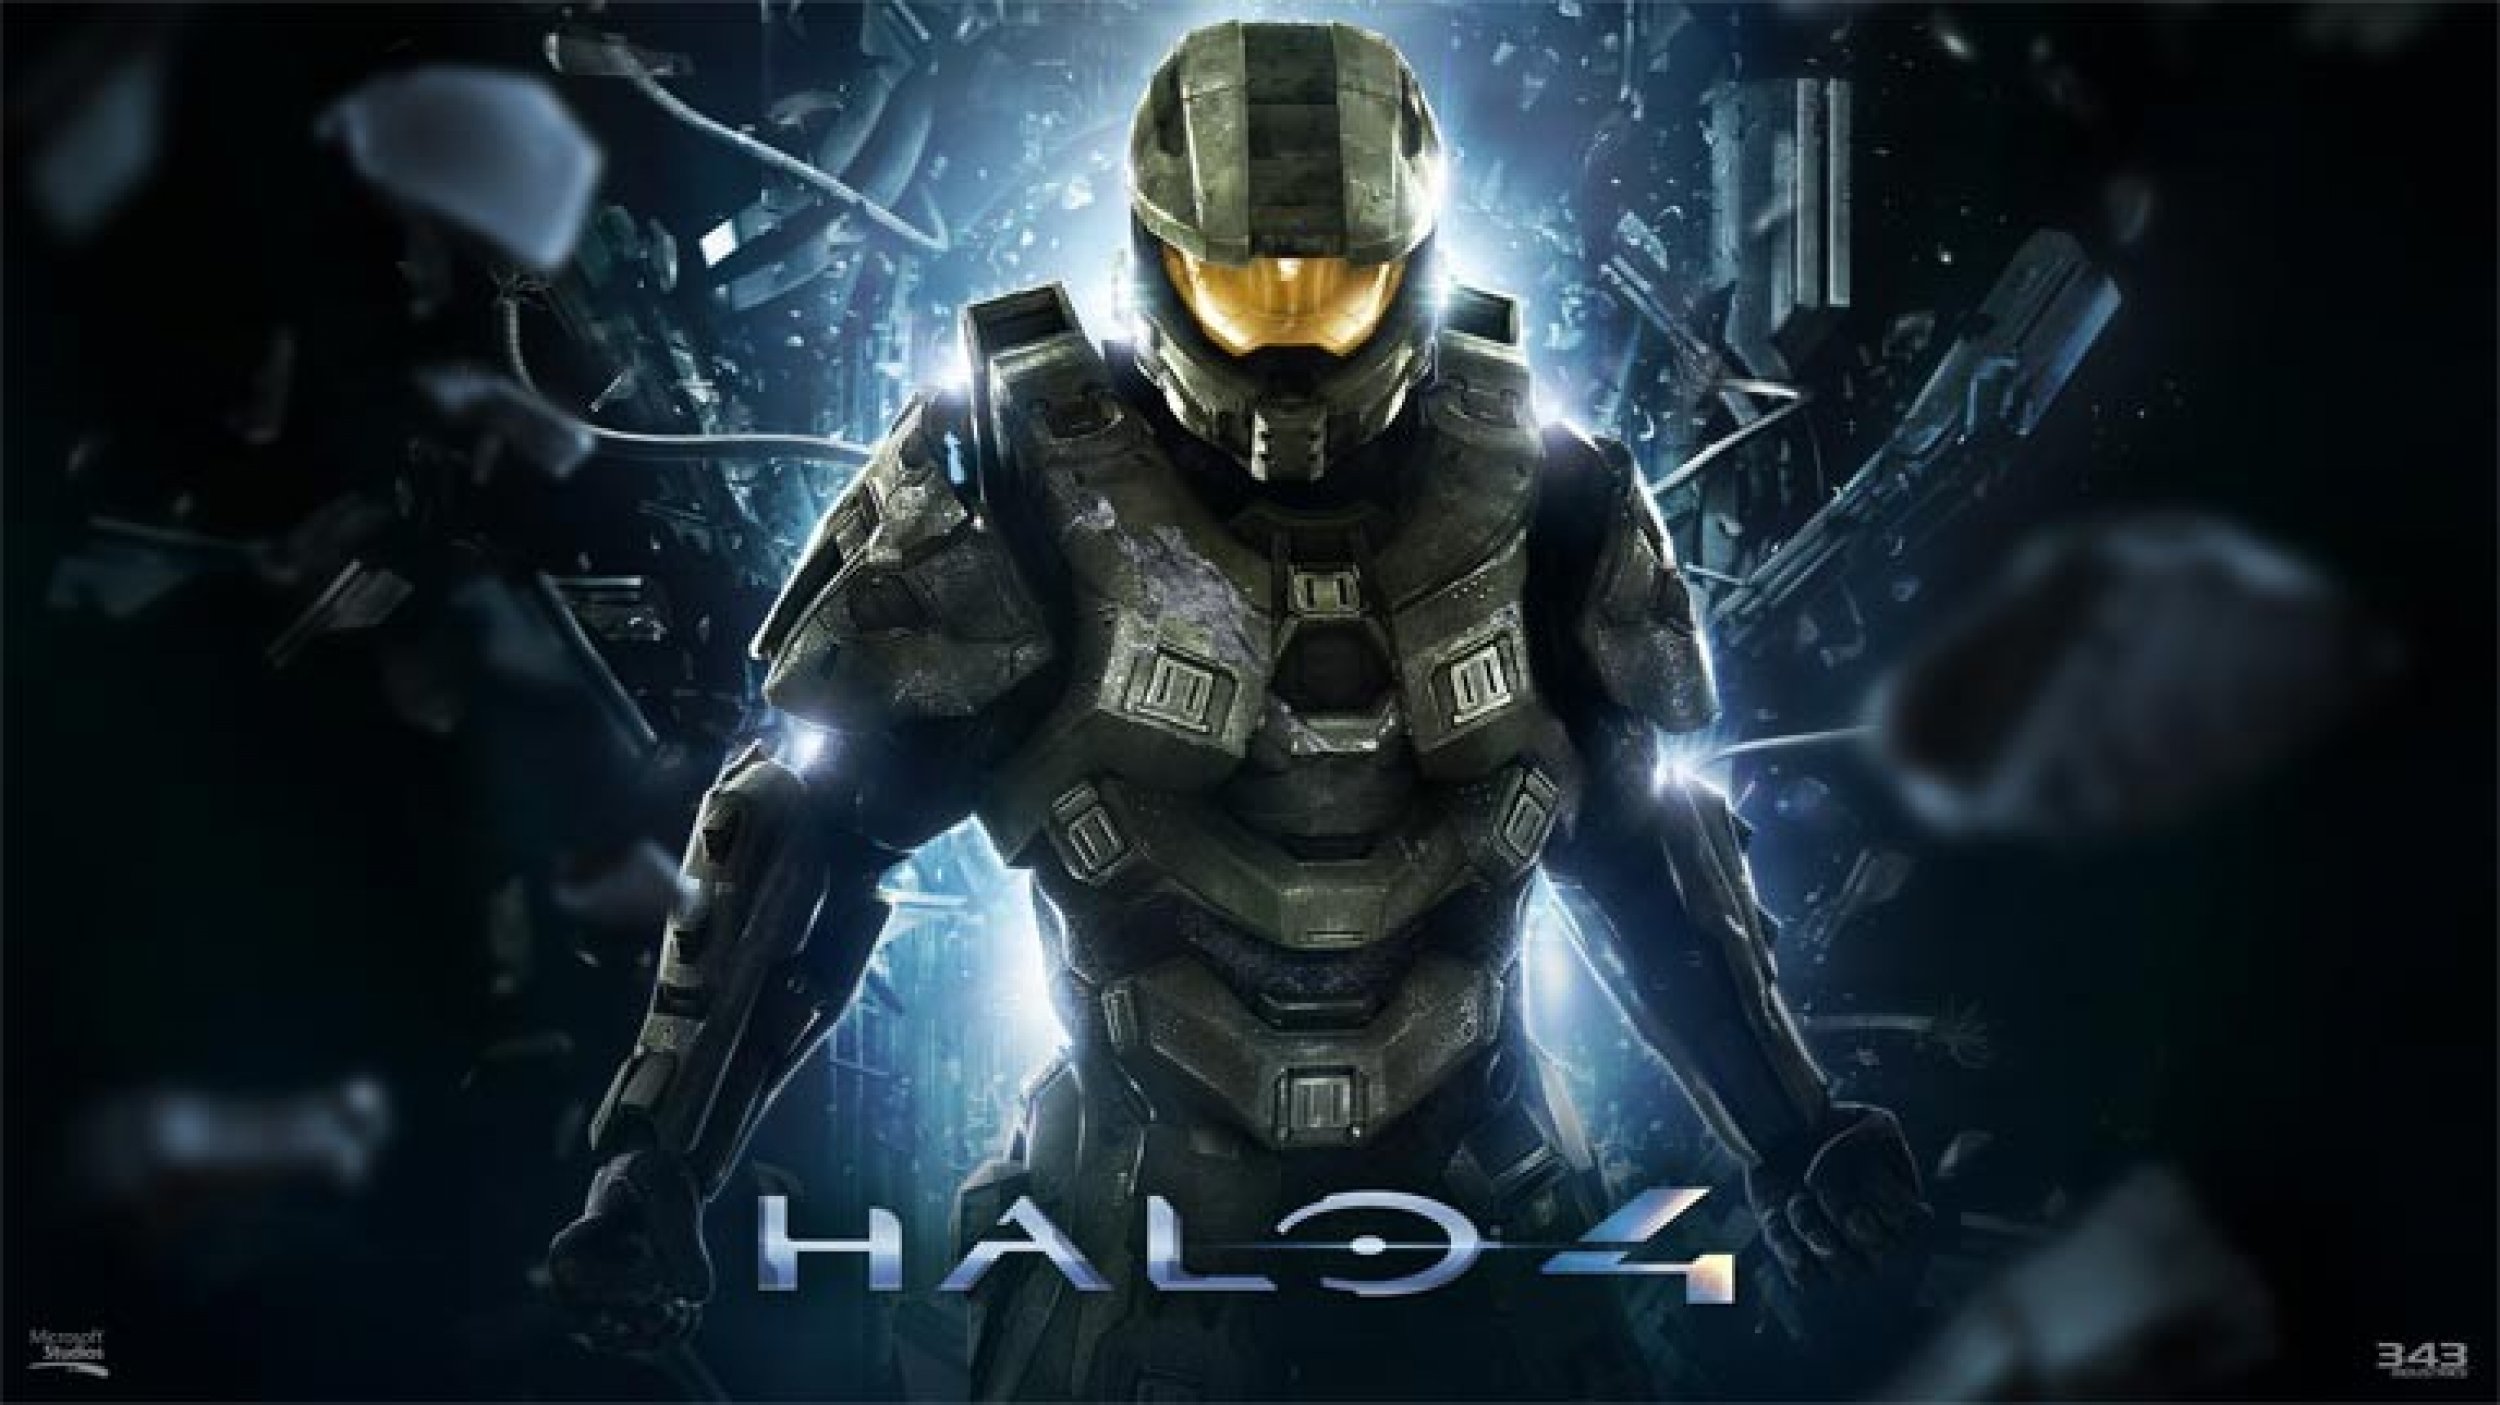 Halo 4 Release Date Trailer and Leaked Art Reveals Multiplayer Map, But Halo 2 Most Popular VIDEO 